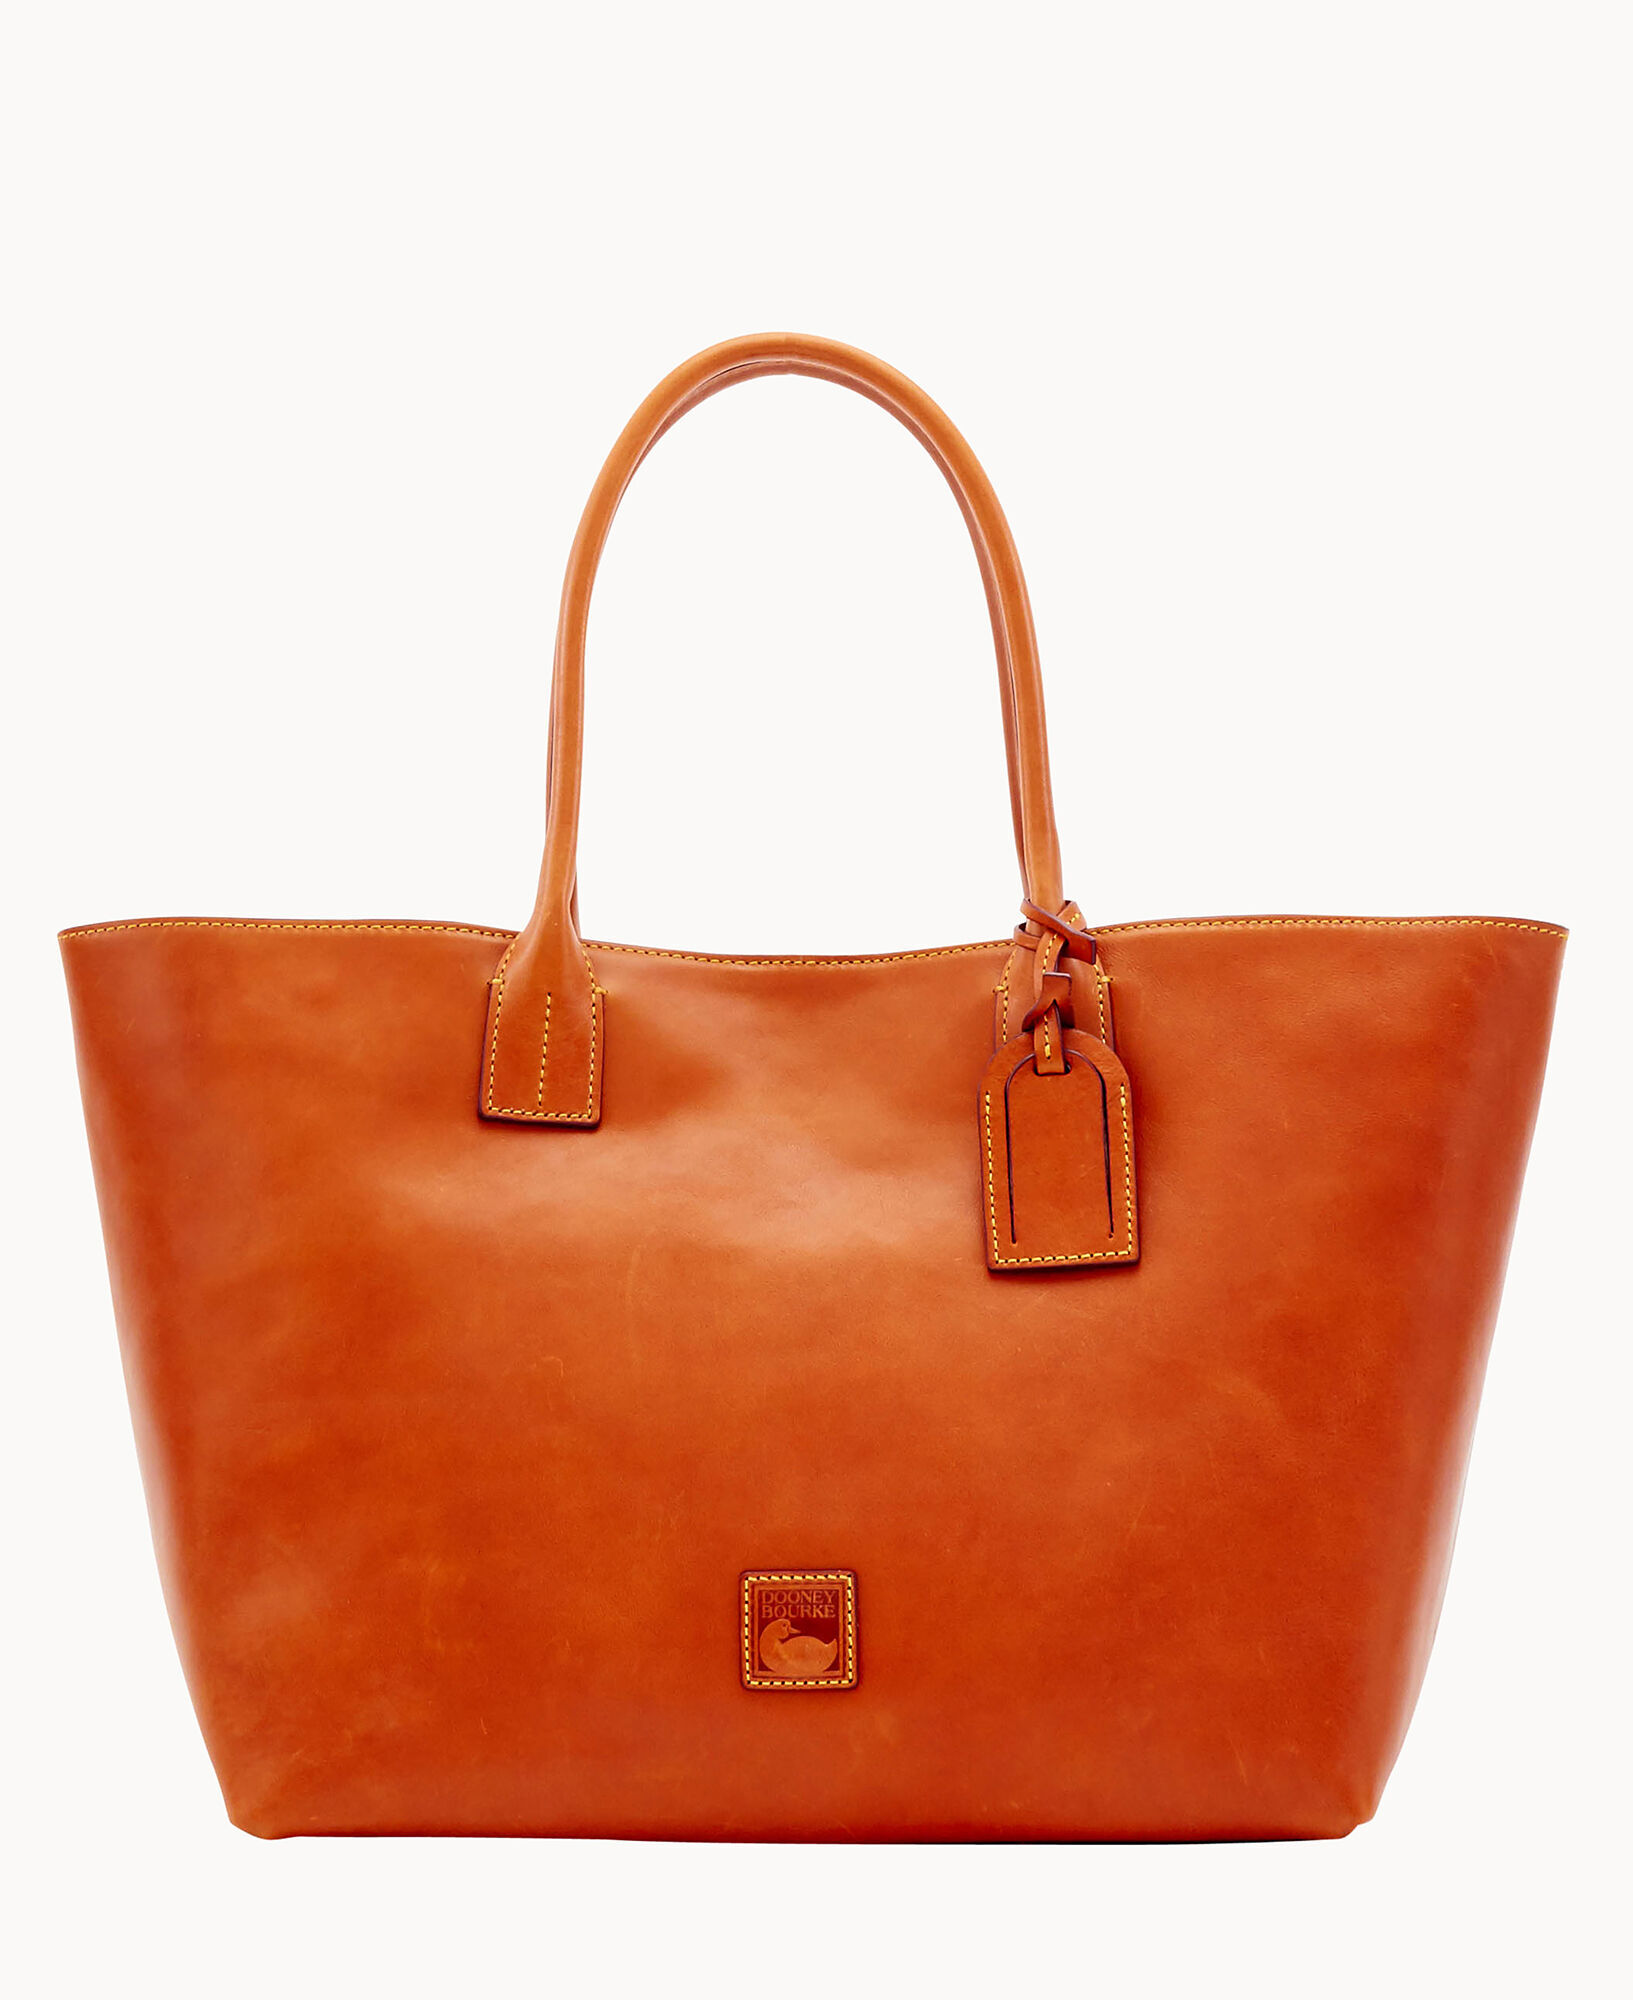 leather dooney and bourke